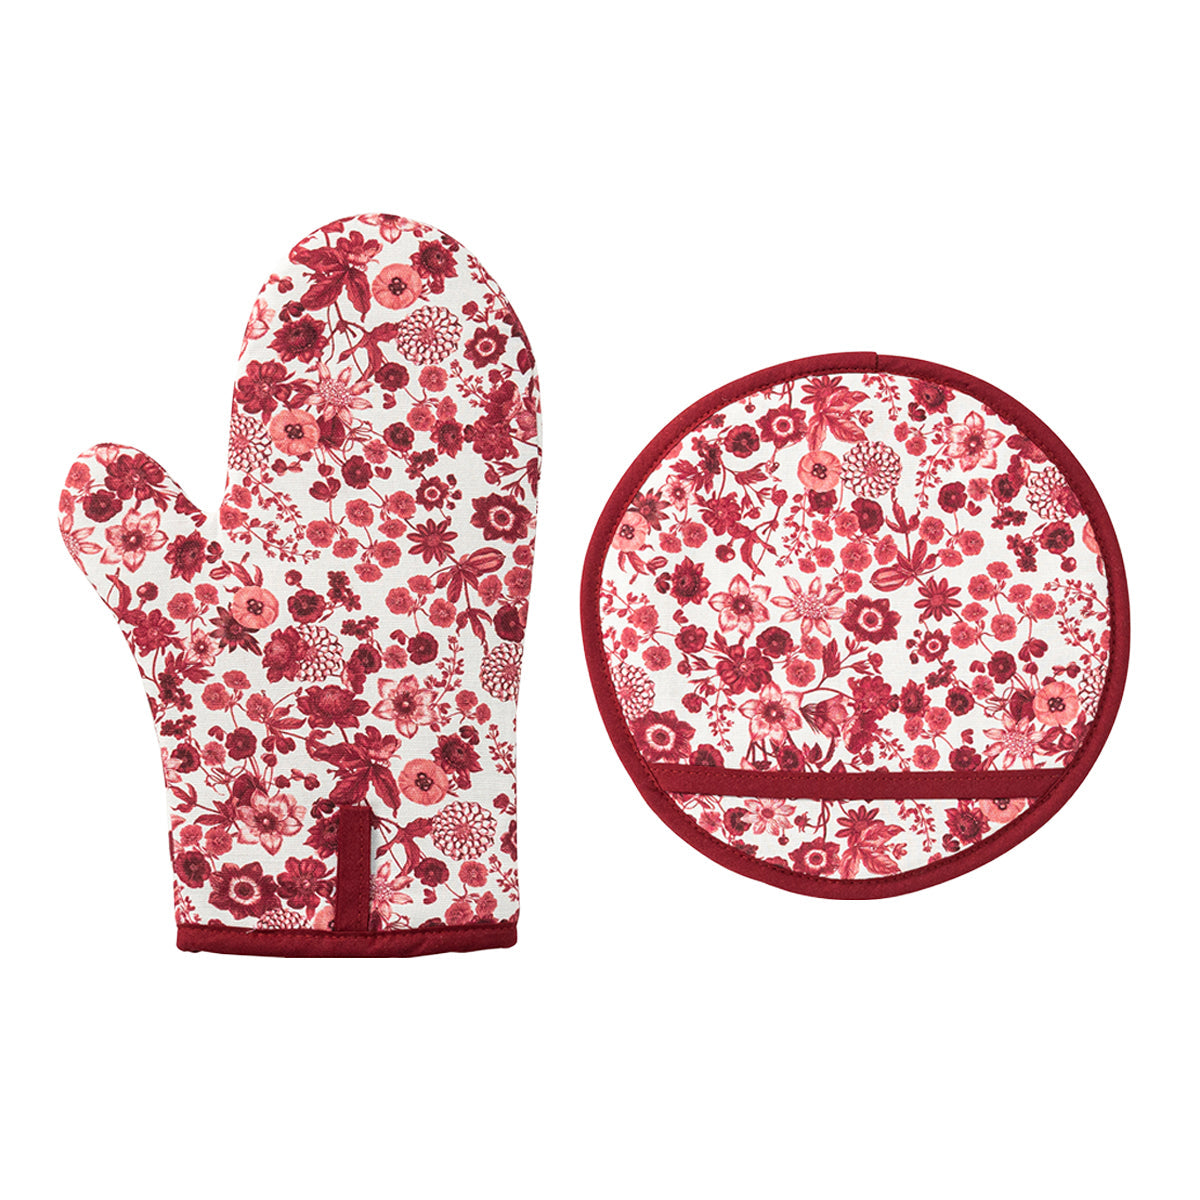 Field of Flowers Oven Mitt and Pot Holder Set-2pc - Ruby-1st